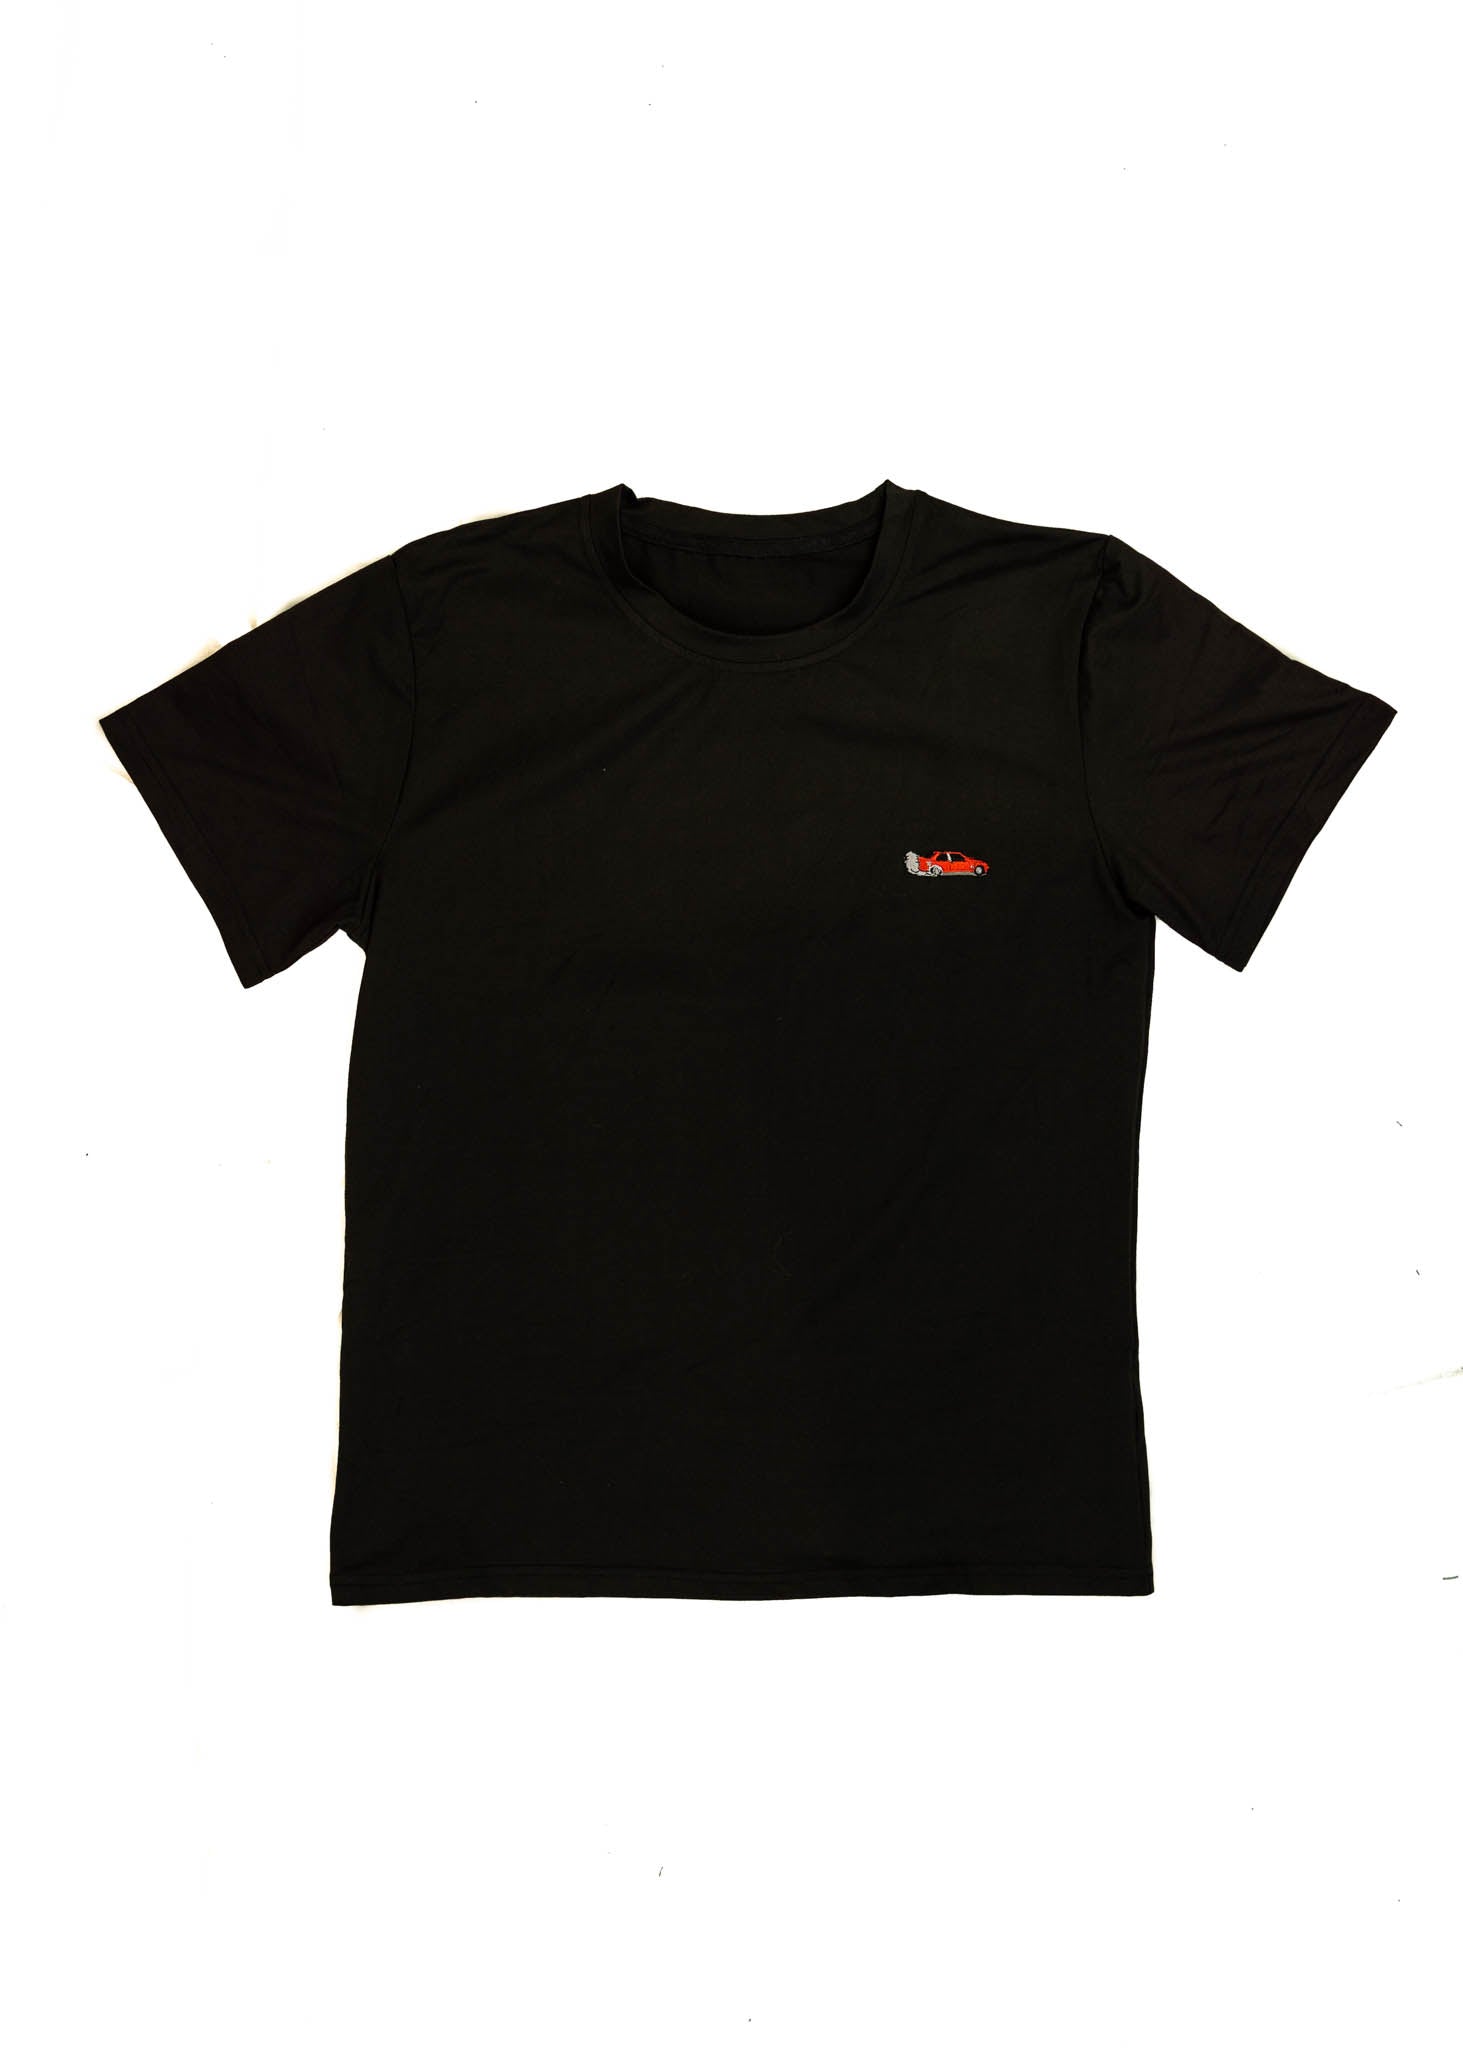 A black BMW/Bimmer E30 M3 T-Shirt for men. Photo is the front view of the shirt with an embroidered Red BMW E30 M3 Coupe. Fabric composition is 100% polyester. The material is very stretchy, soft, comfortable, breathable, and non-transparent. The style of this shirt is short sleeve, with a crewneck neckline.